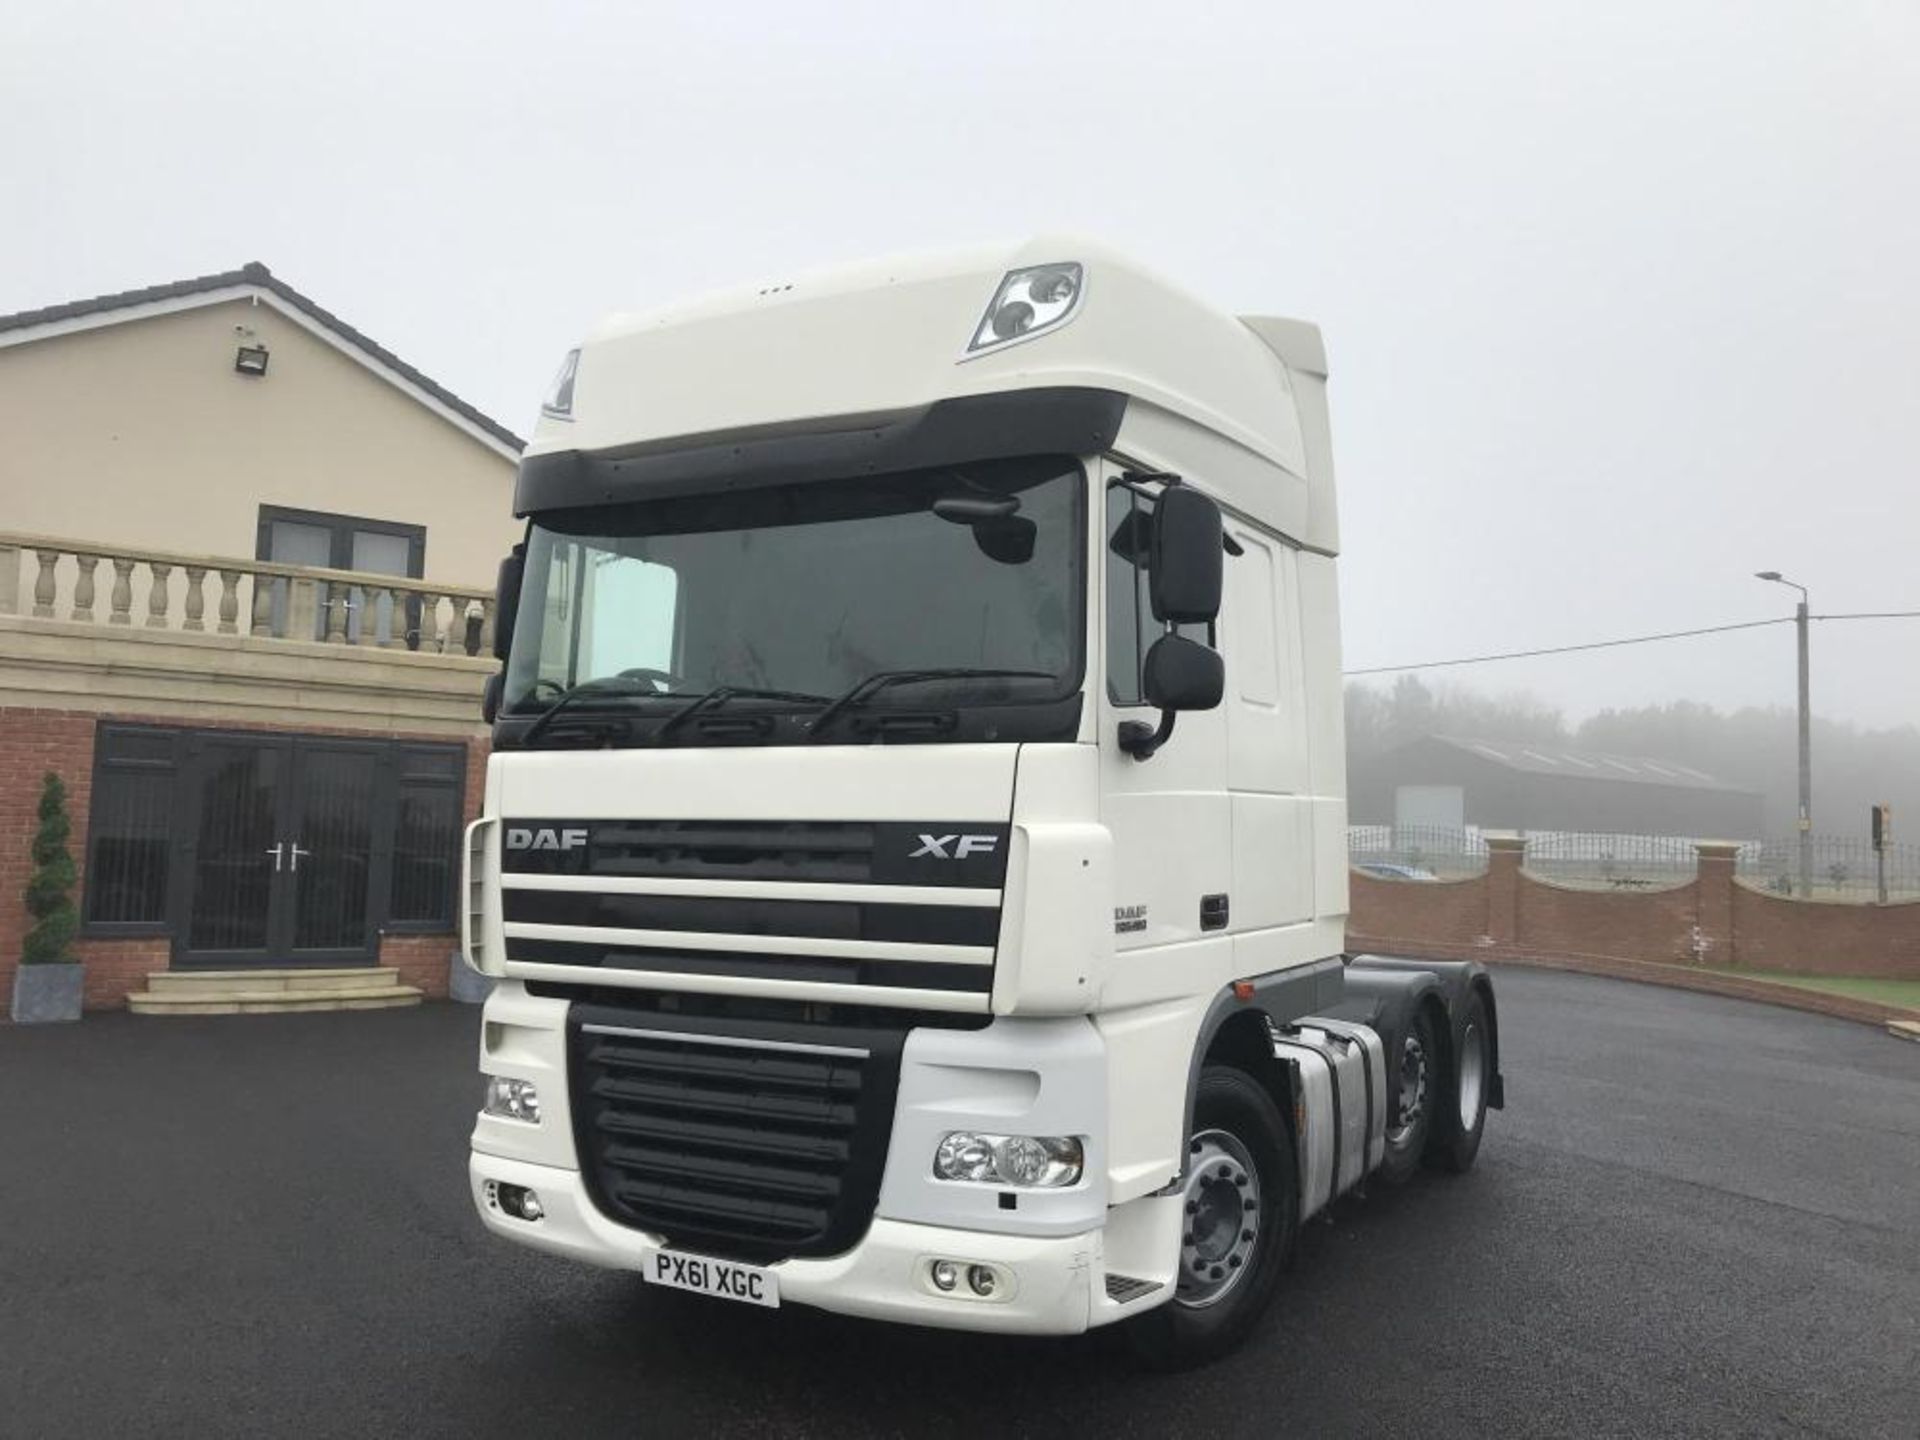 2011/61 REG DAF XF 105.460 SUPER SPACE TRACTOR UNIT 6X2 MANUAL GEARBOX AIR CON *PLUS VAT* - Image 2 of 19